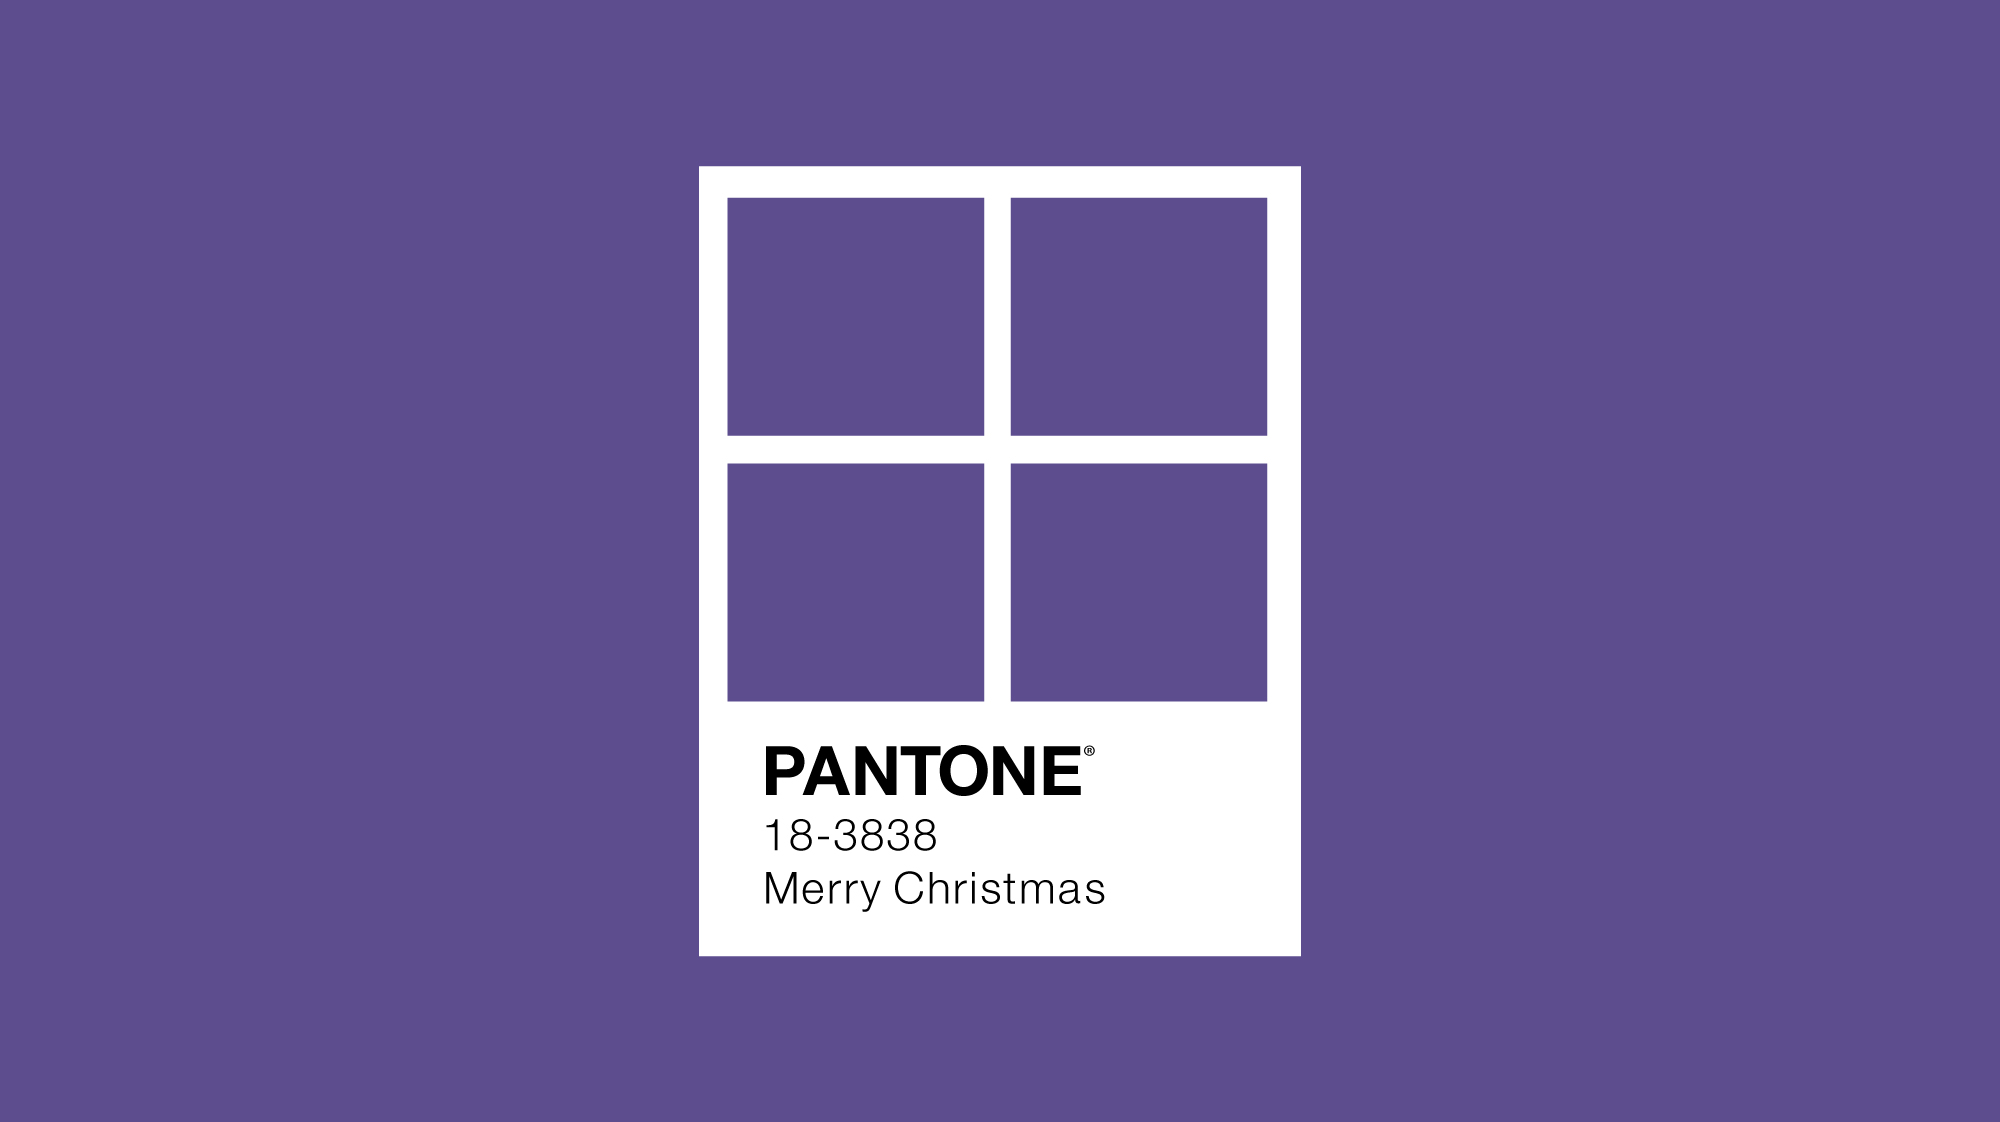 Pantone colour of the year 2018 minimal design with window frame